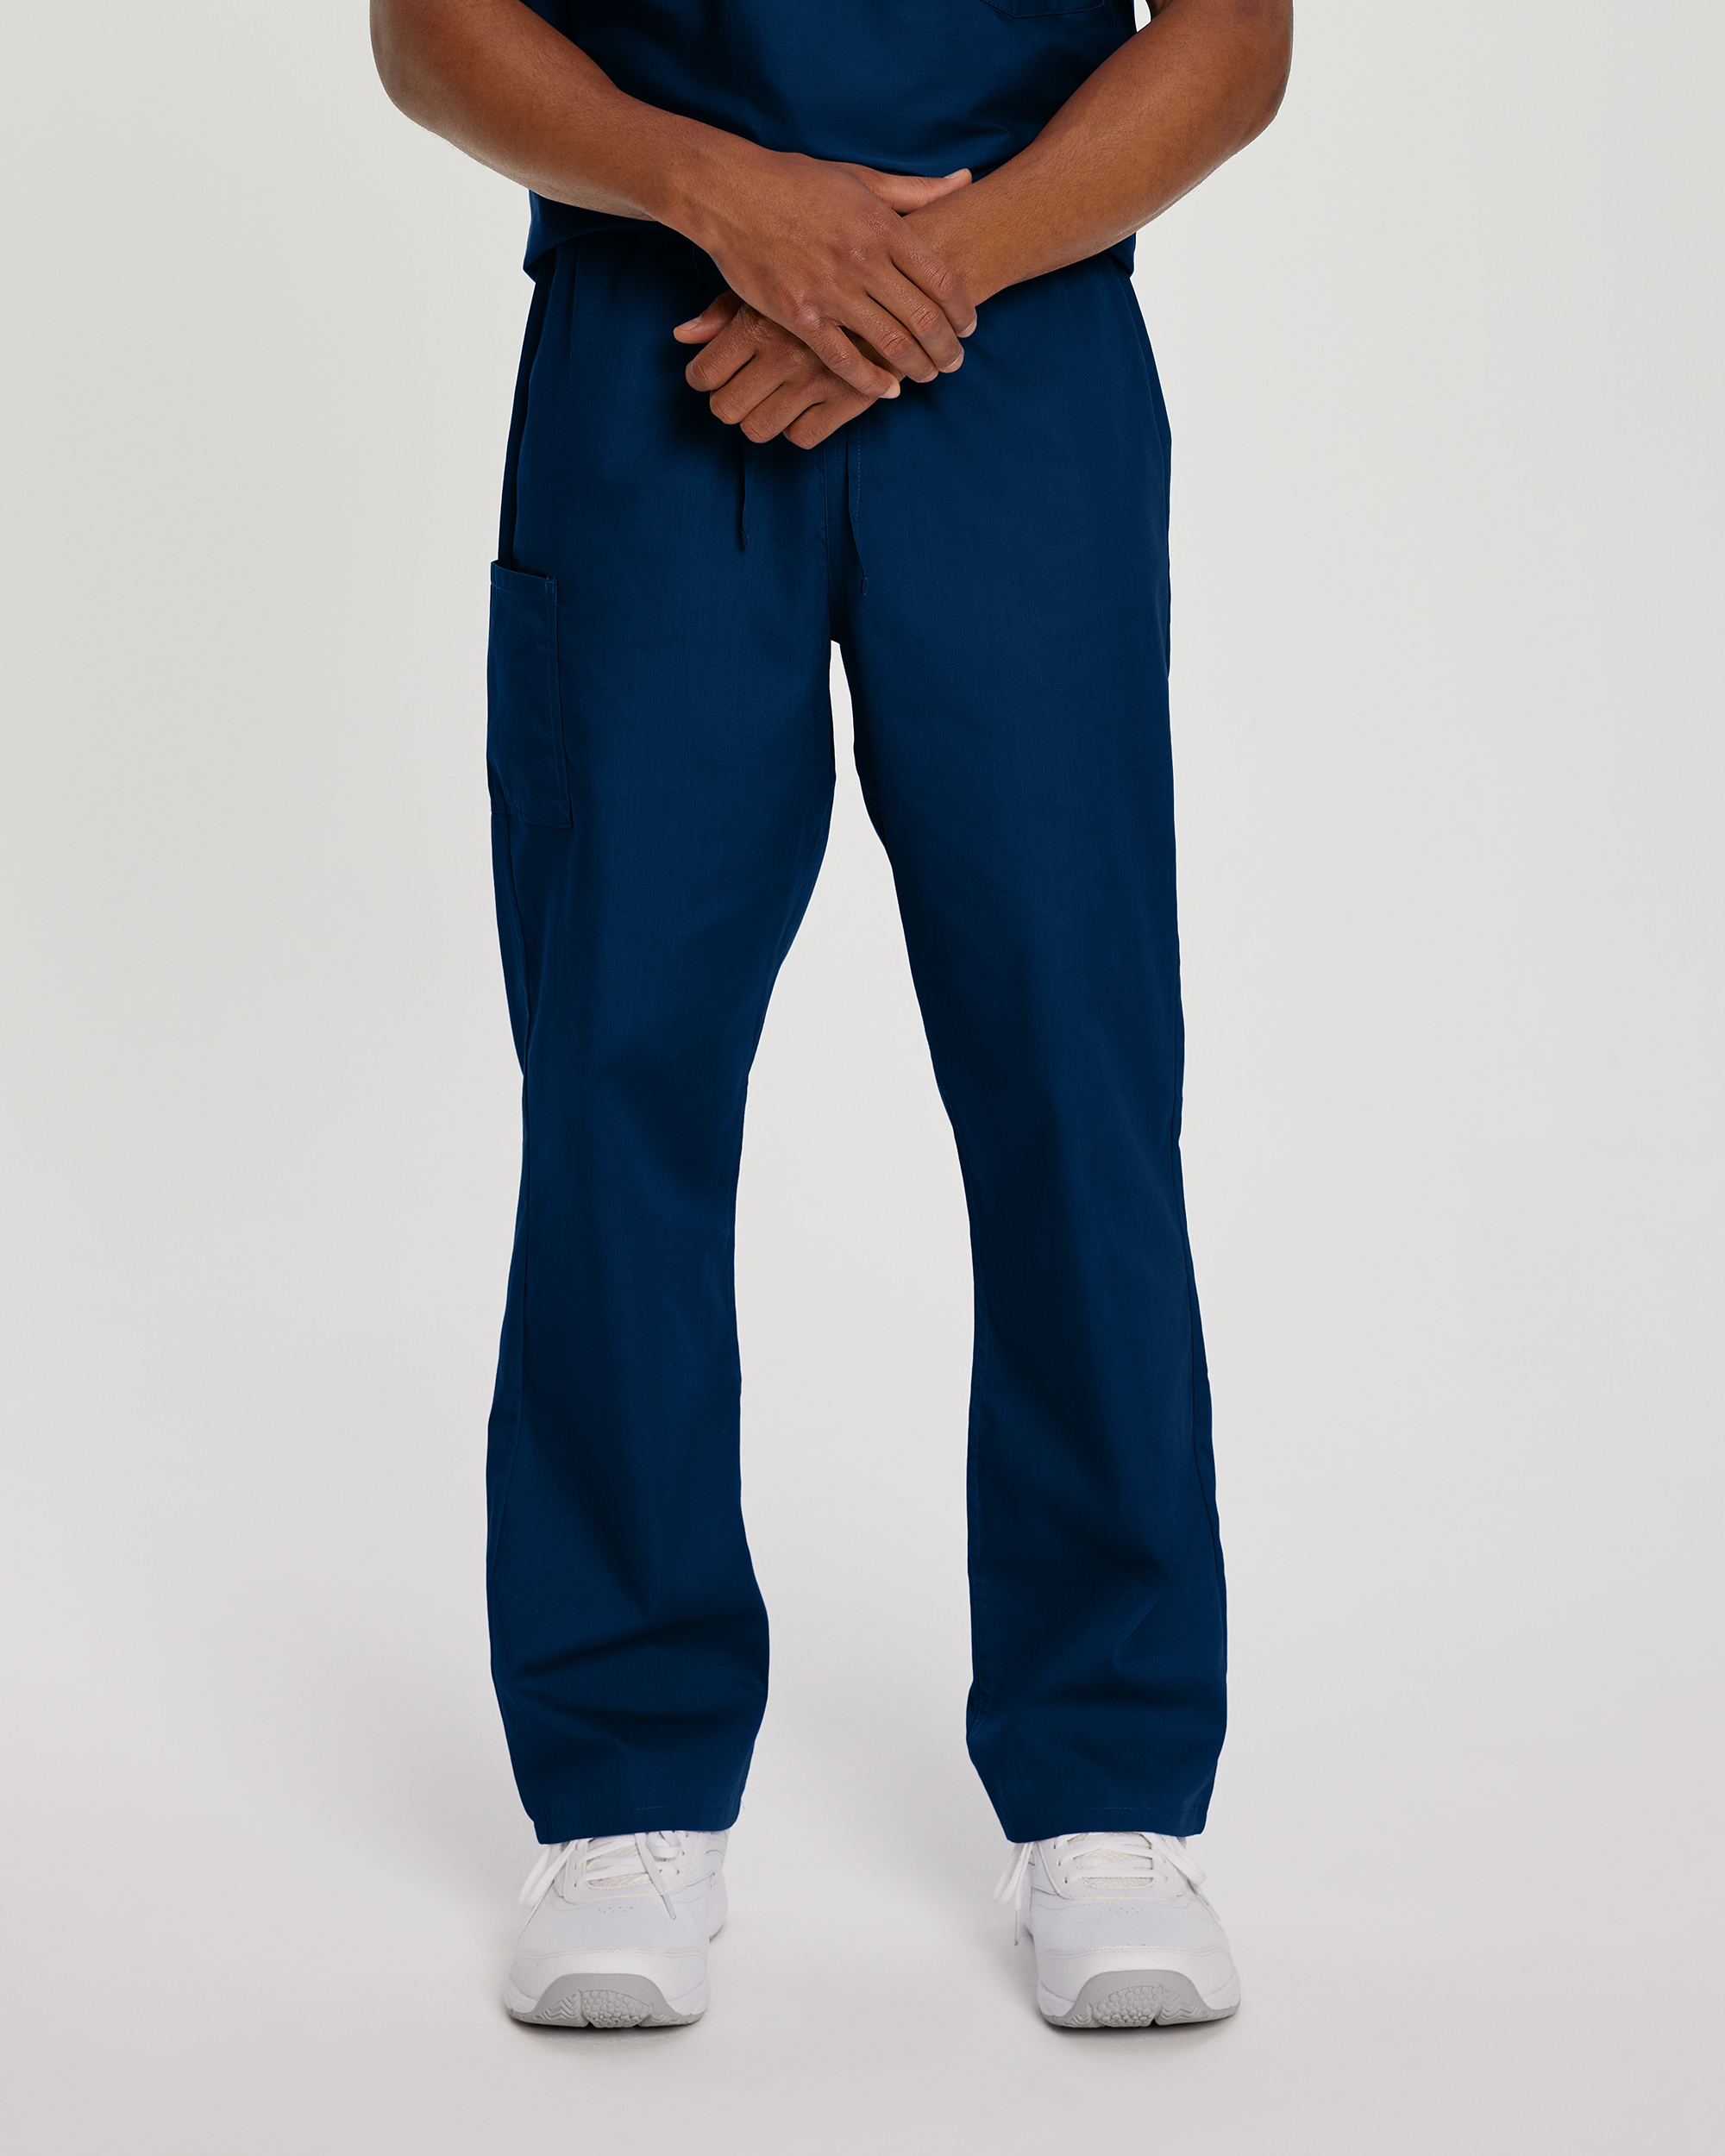 Are these scrub pants available in different sizes?